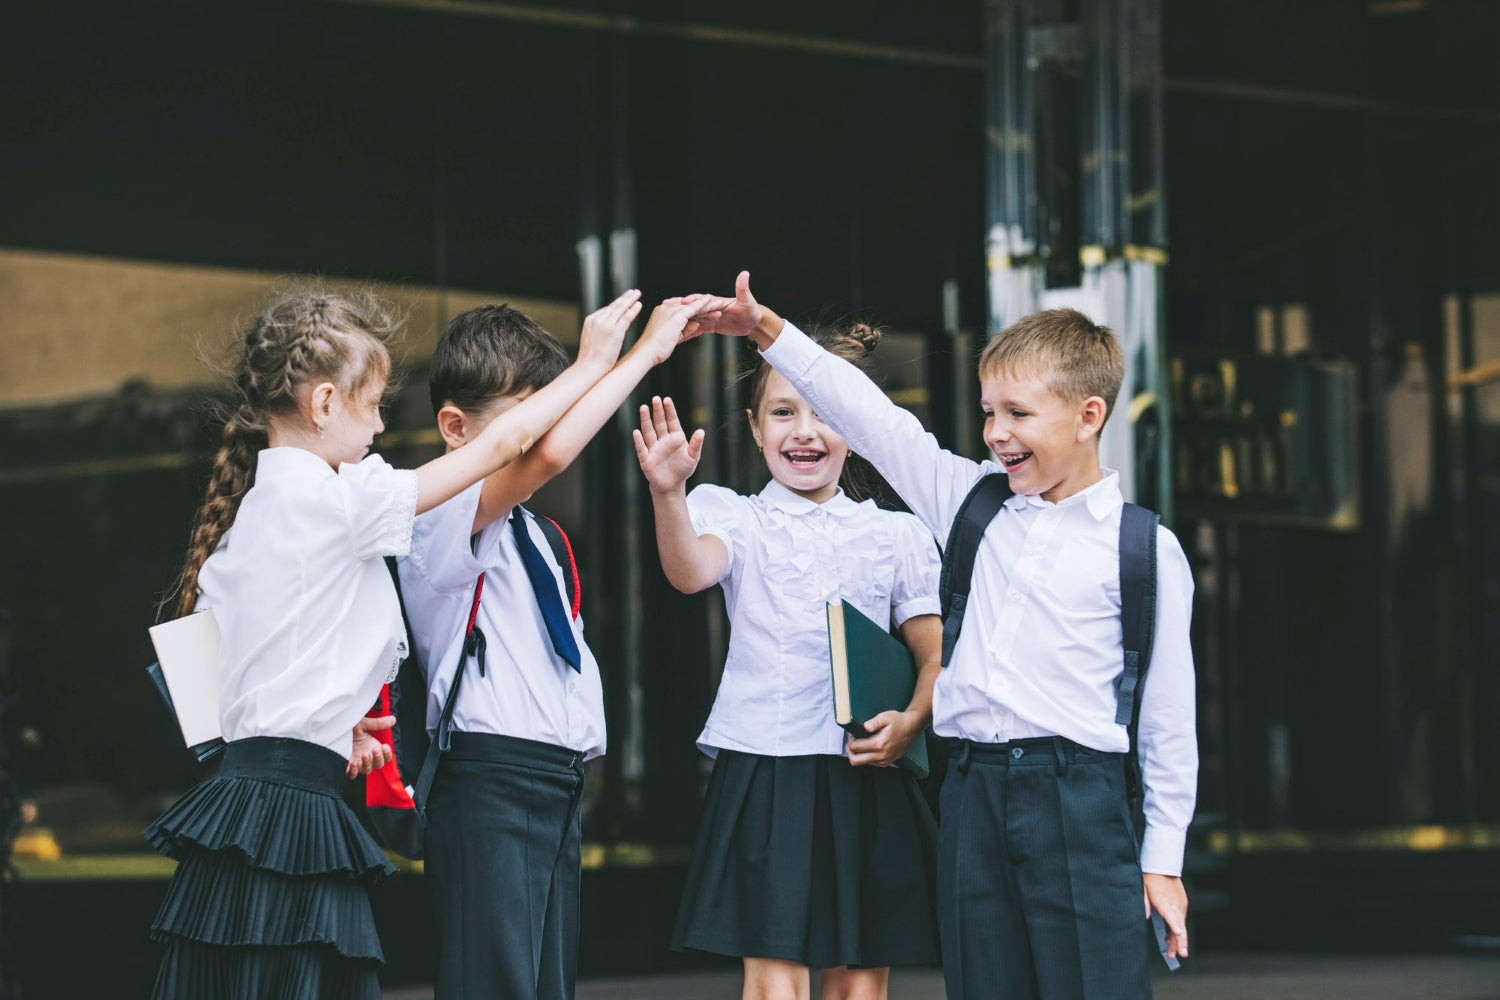 Photo of school children high fiving and smiling to illustrate the role of schools in nurturing youth emotional support